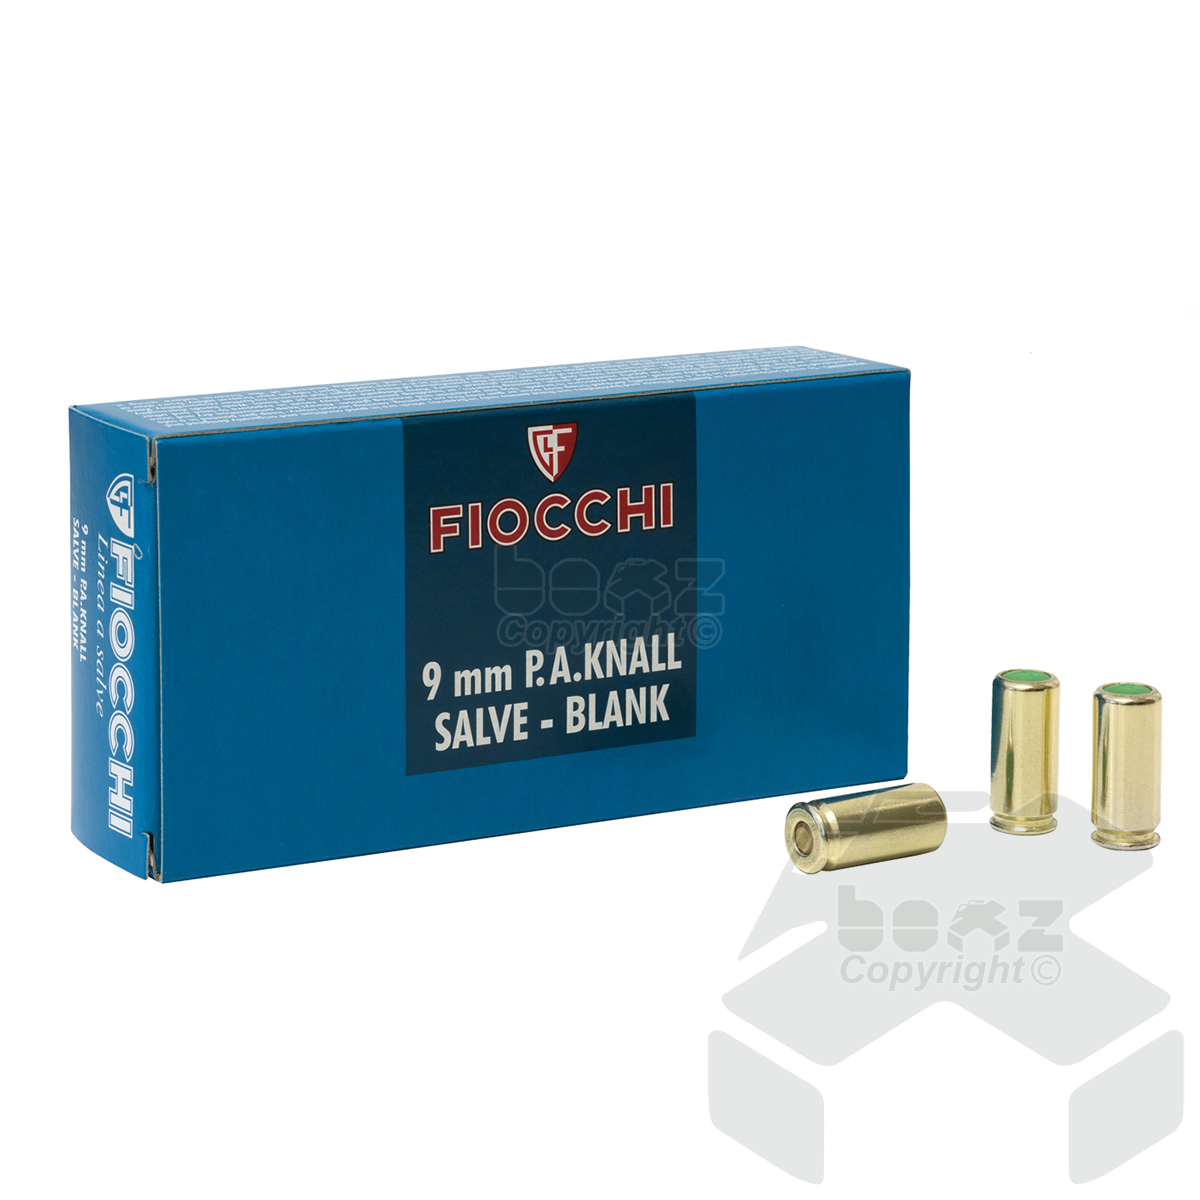 Fiocchi 9mm P.A.K Blanks, Box of 50 Blanks